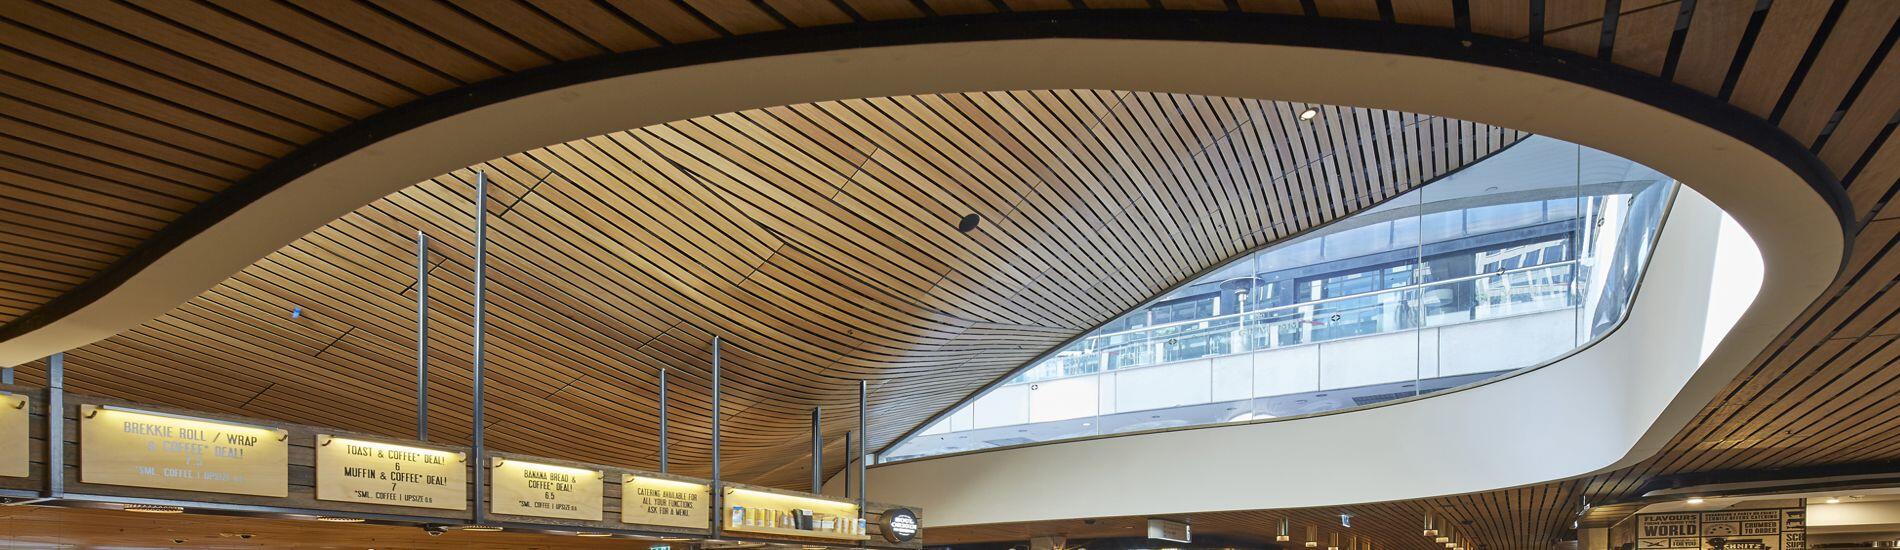 SUPASLAT Slatted Timber Ceiling Panels in Complex Design for Foodcourt